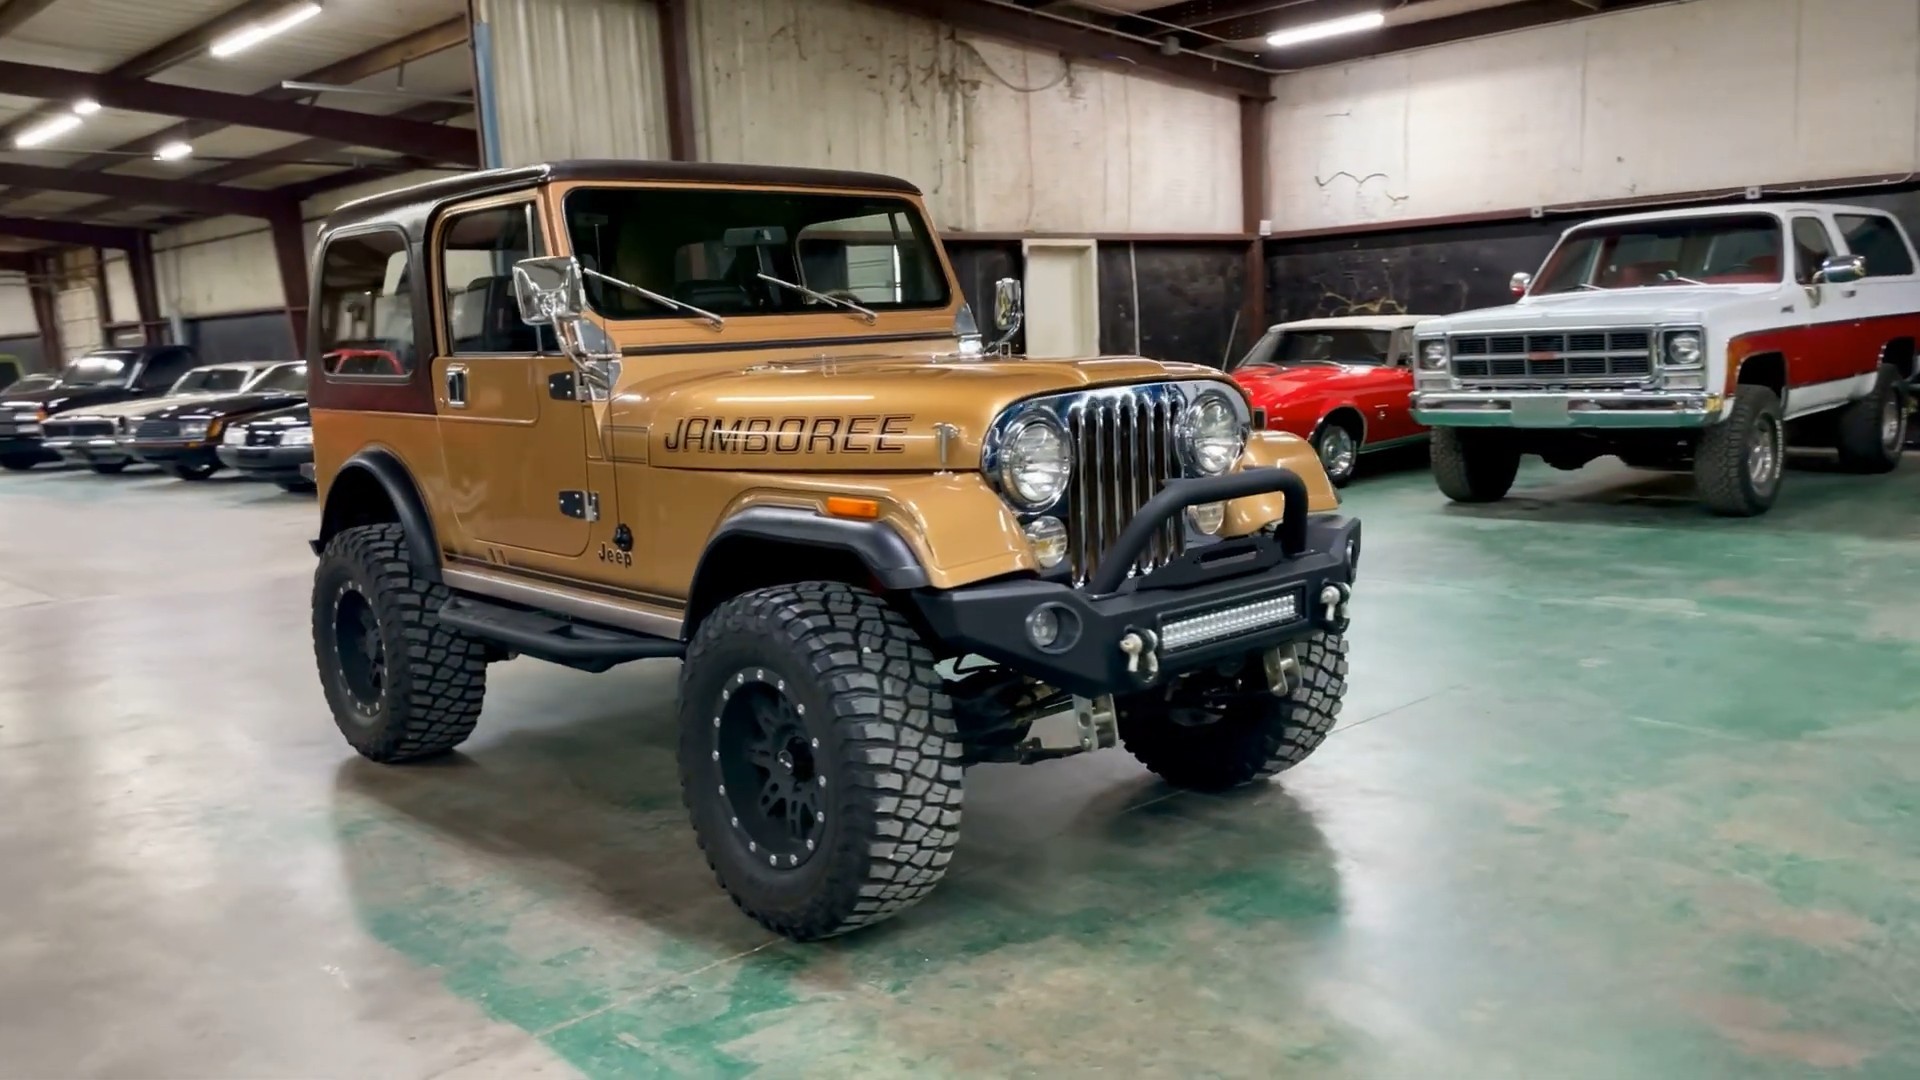 Jacked-Up 1982 Jeep CJ-7 Jamboree 4x4 Looks Ready for Scouting the Entire  World - autoevolution